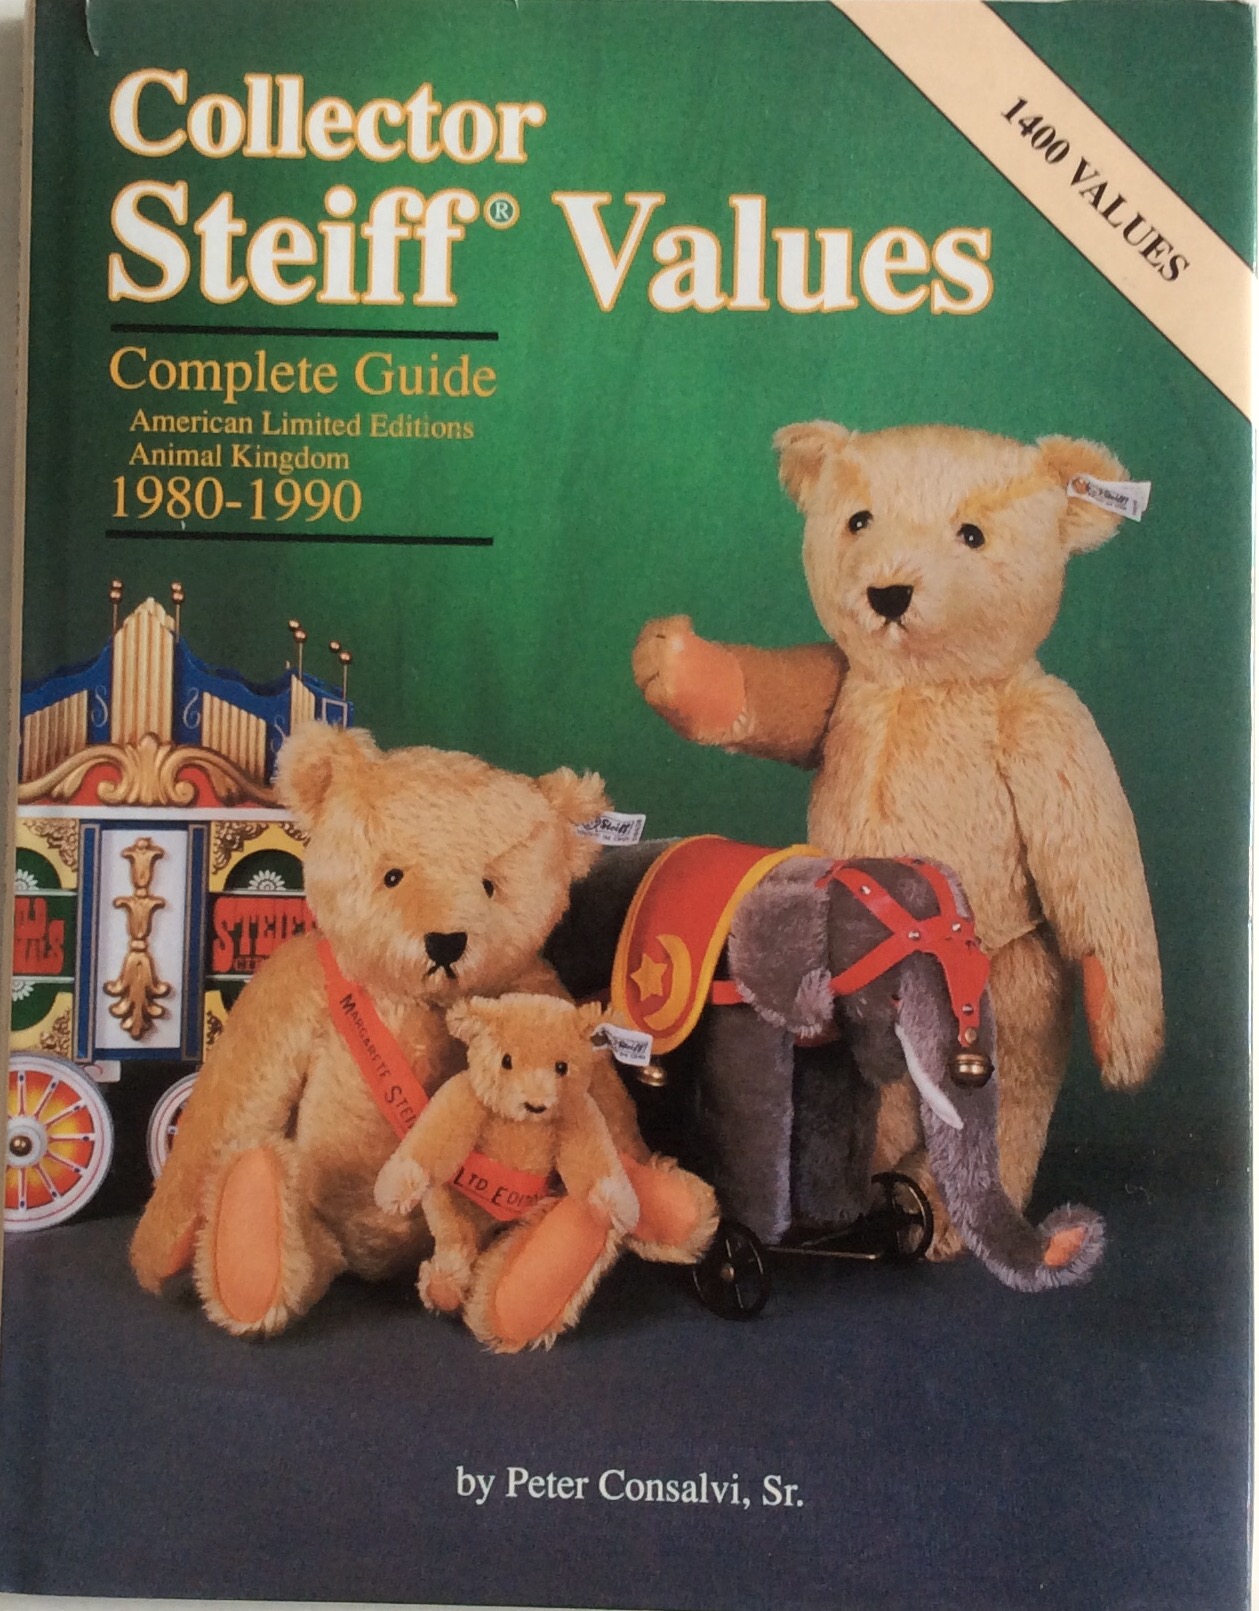 COLLECTOR STEIFF VALUES COMPLETE GUIDE AMERICAN LIMITED EDITIONS ANIMAL  KINGDOM 1980-1990 by Consalvi, Peter: Very Good Hardcover (1994) 1st  Edition | Chris Barmby MBE. C & A. J. Barmby